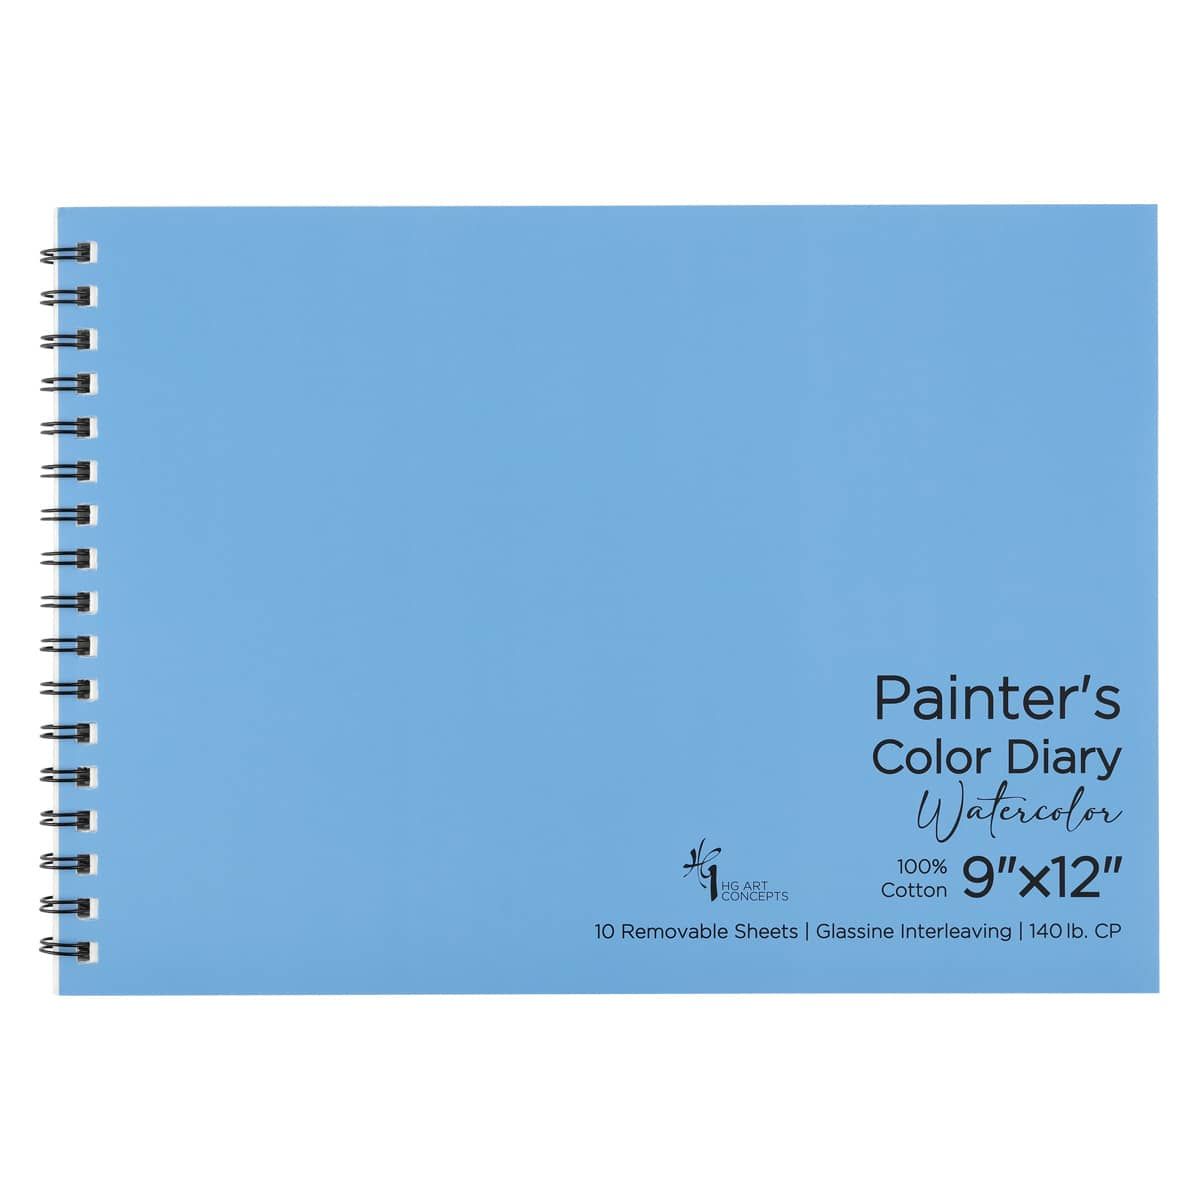 Painter's Color Diary, for Watercolor and Multimedia by HG Art Concepts